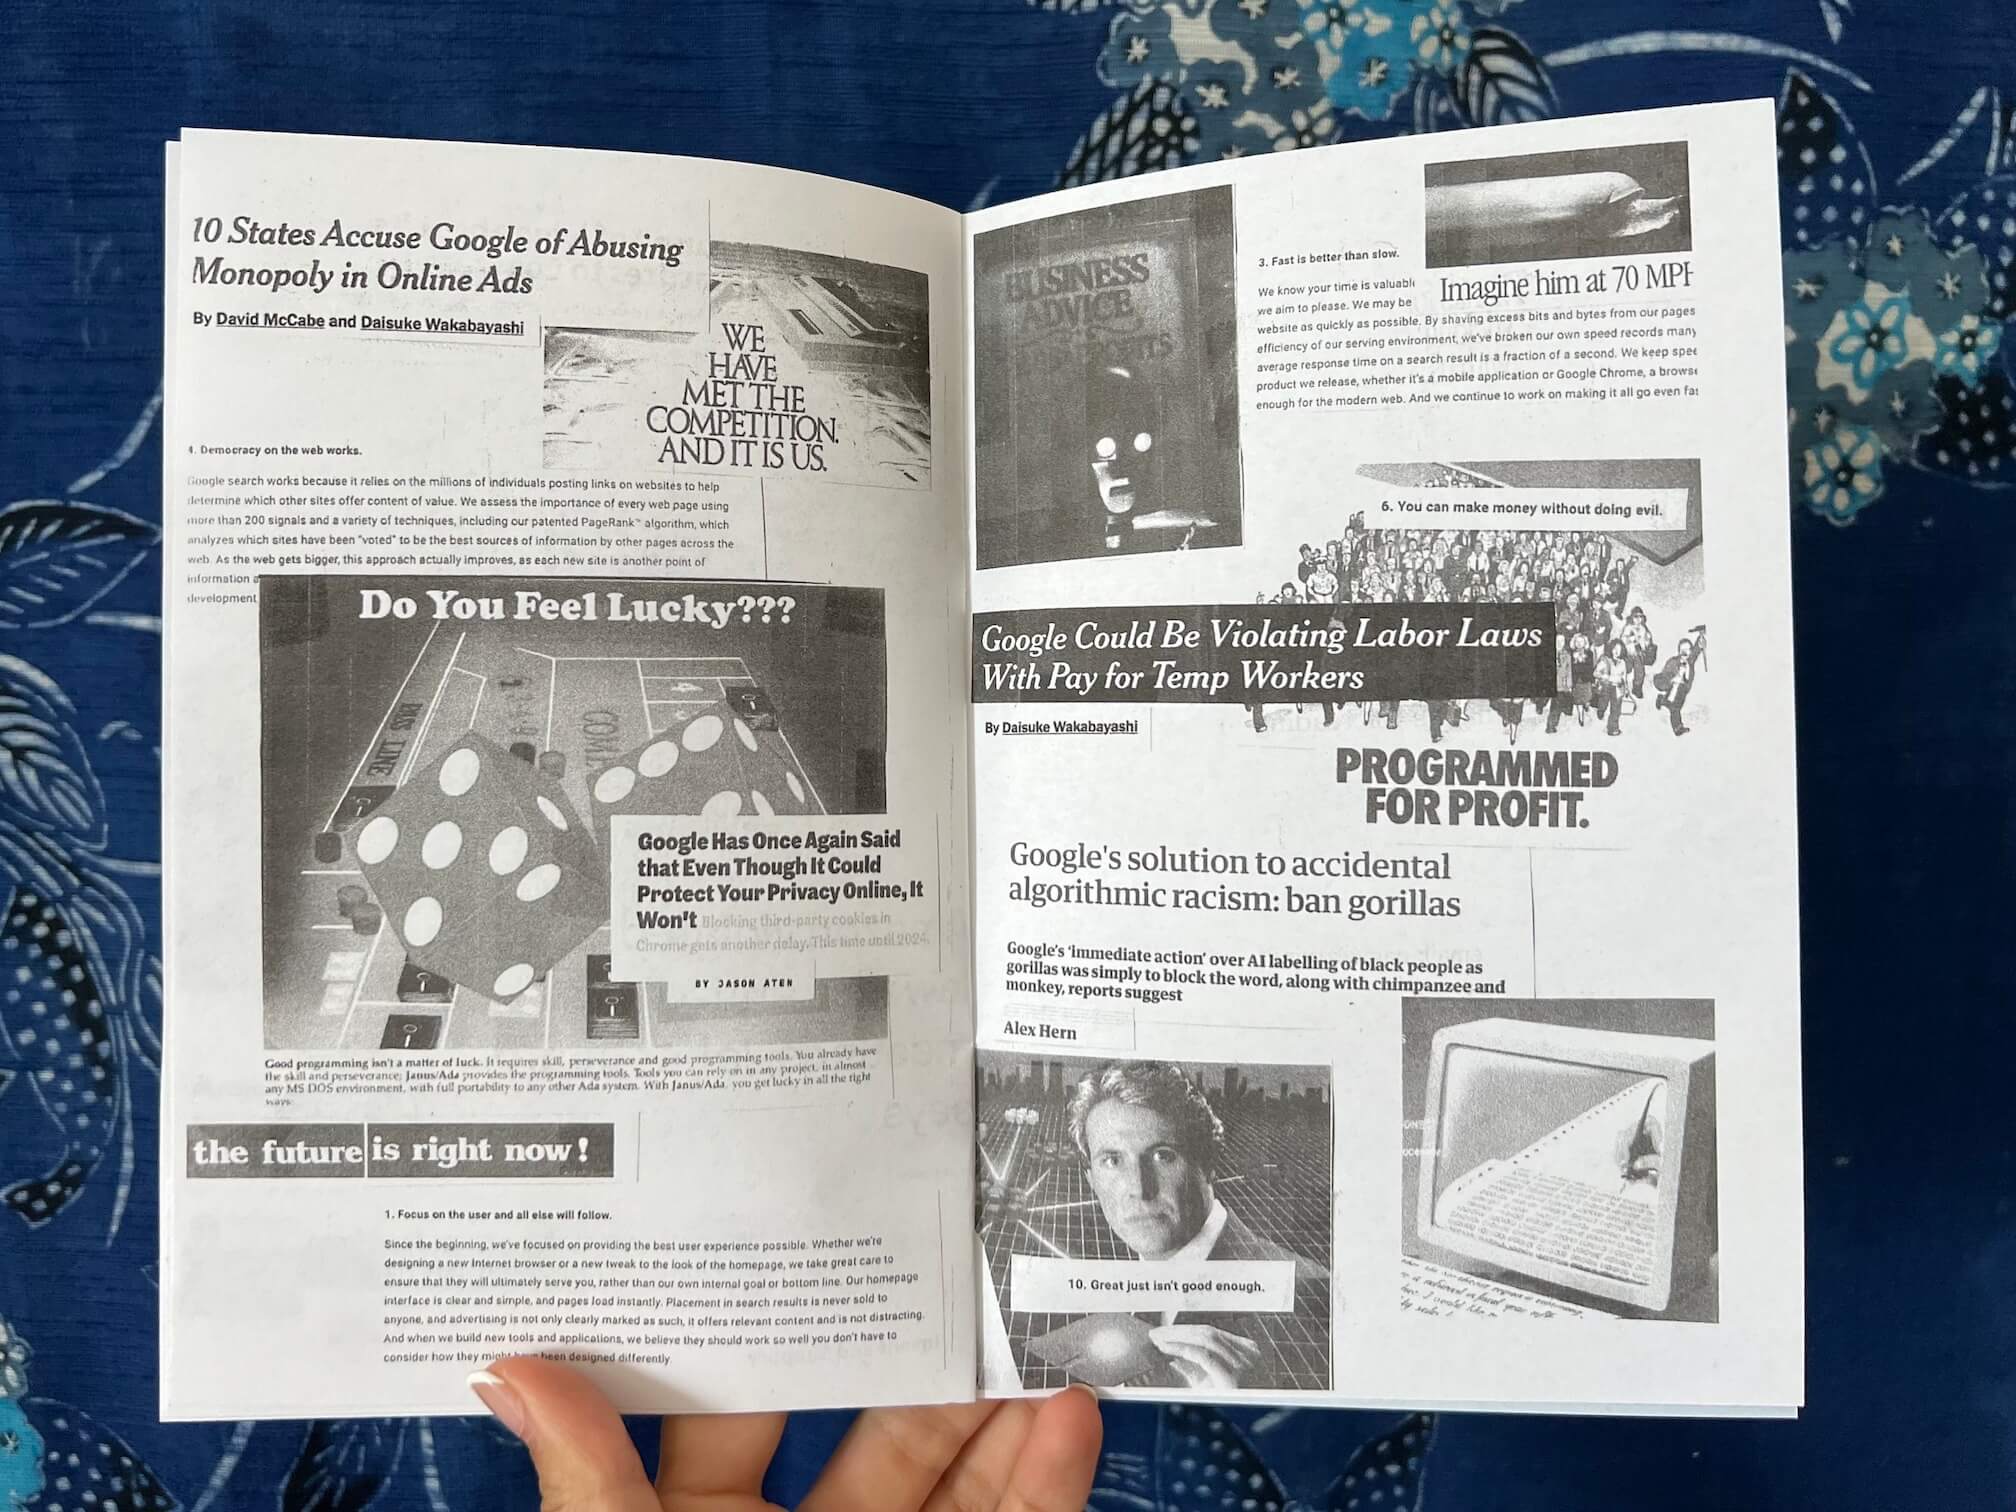 A spread in the zine about Google's core values, like 'Focus on the user and all else will follow,' and news article headlines about Google, such as 'Google has once again said that even though it could protect your privacy online, it won't.'